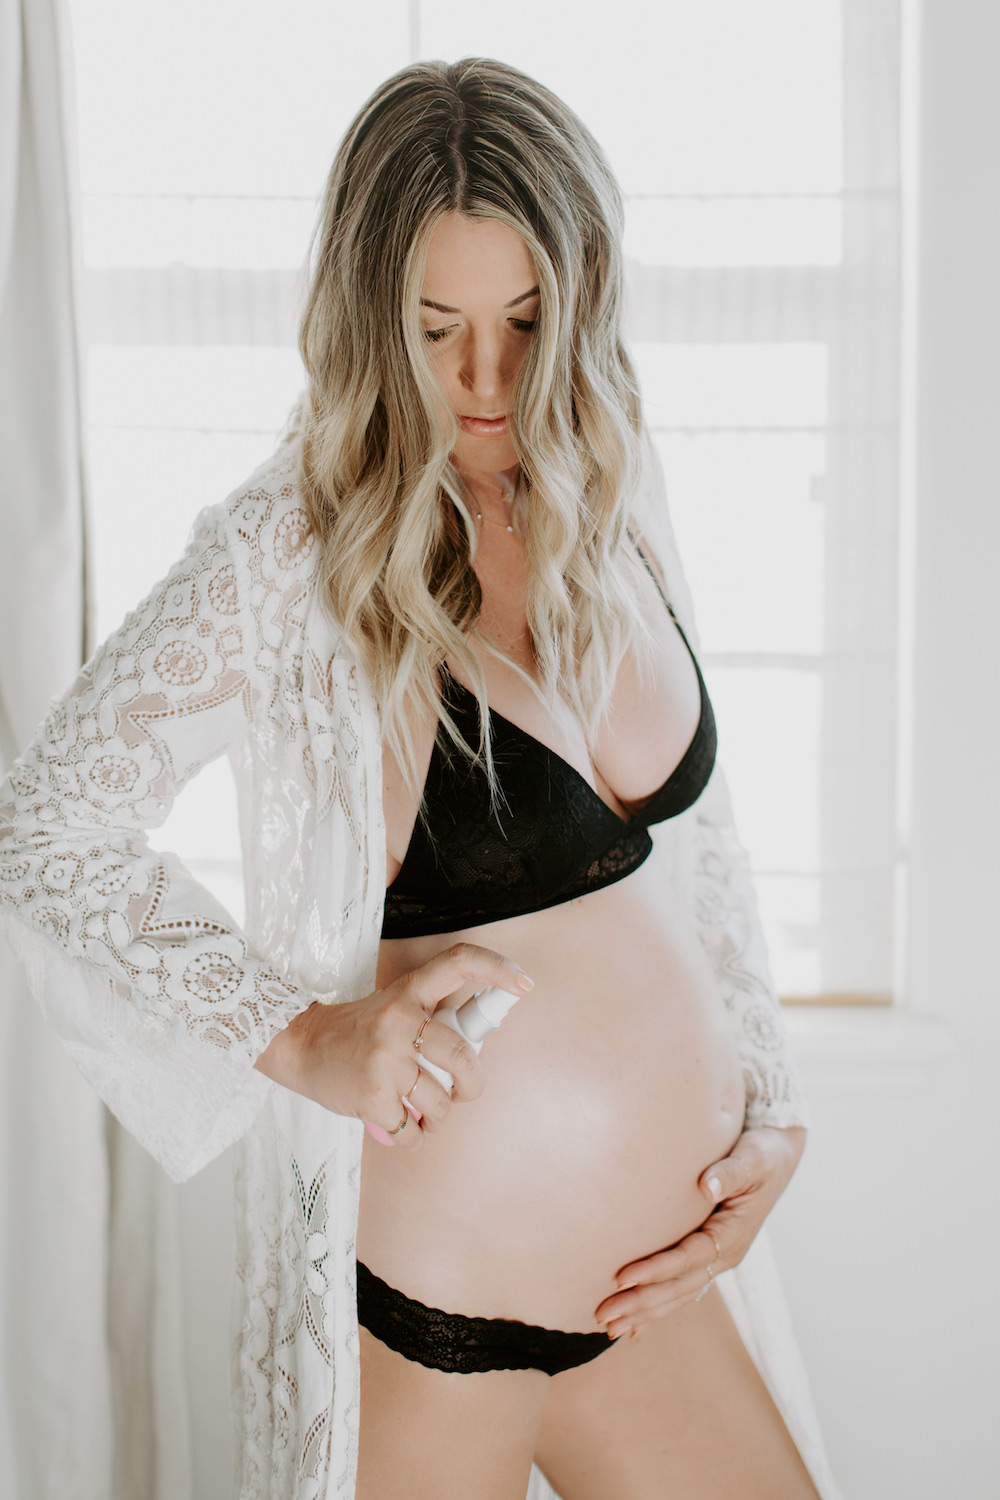 Dash of Darling shares how to avoid getting stretch marks during pregnancy by using her favorite beauty products like coconut melt